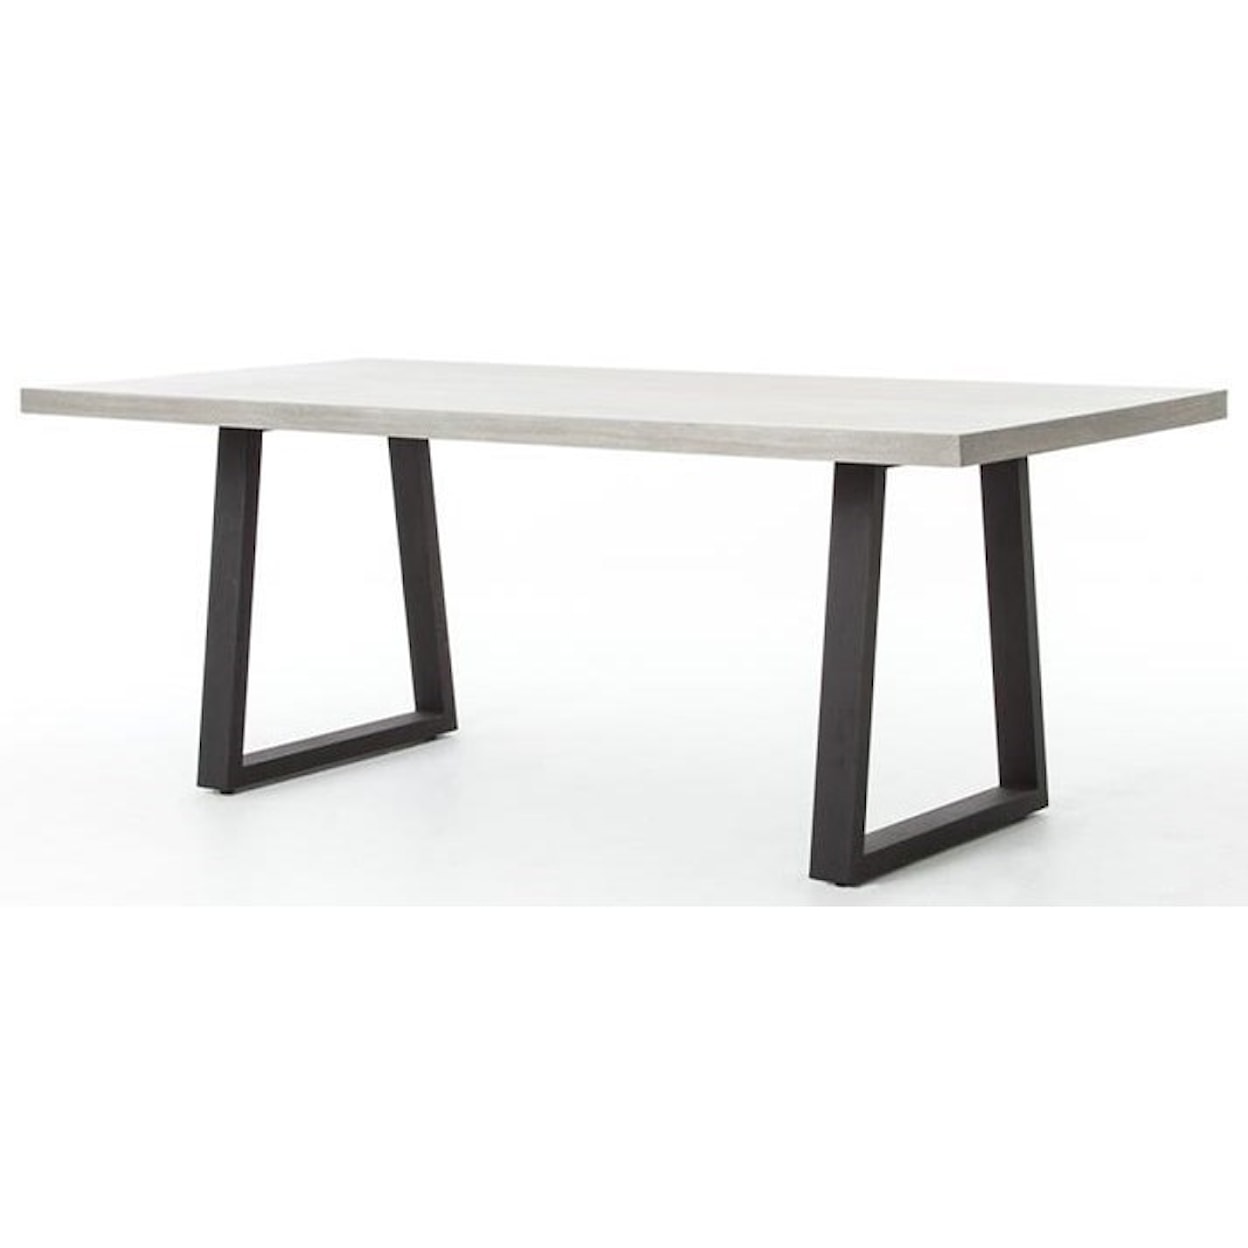 Four Hands Cyrus Cyrus 79” Dining Table